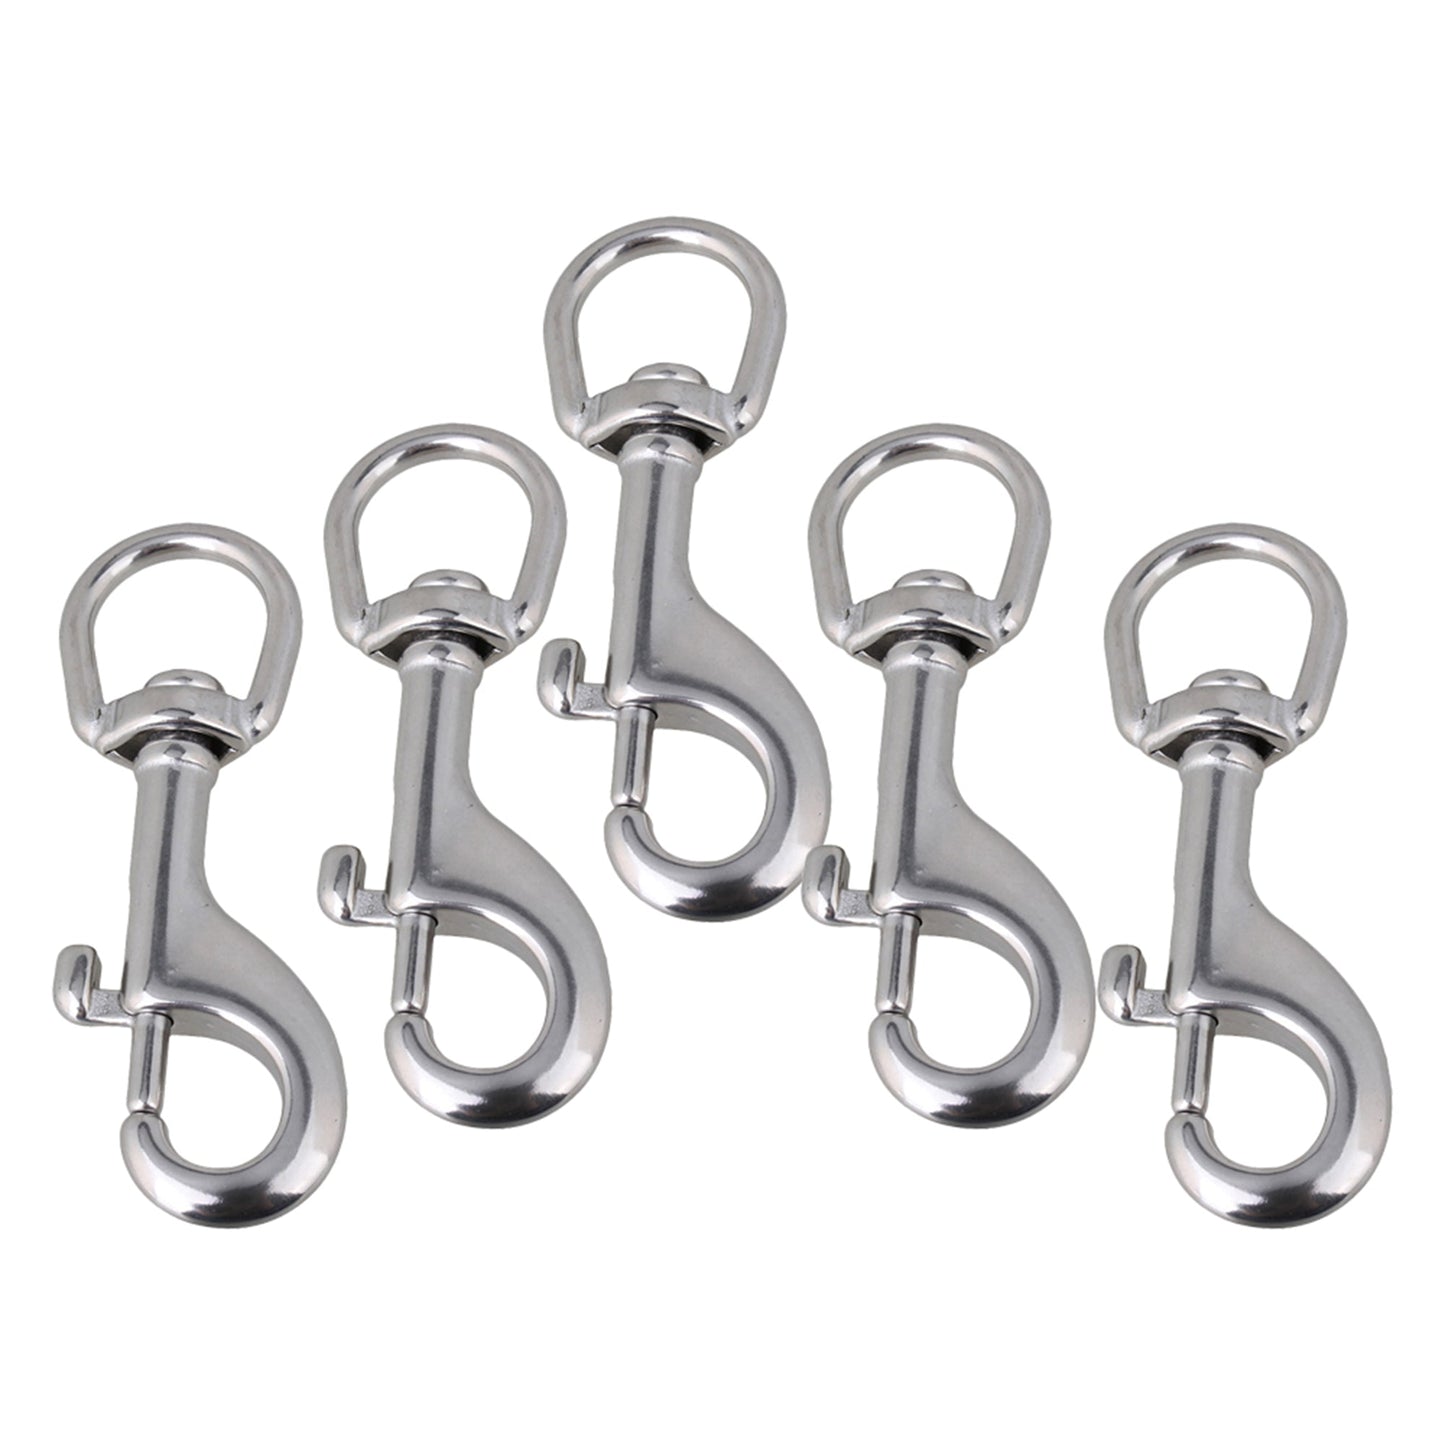 BQLZR Stainless Steel Single Swivel Bolt Snap Clip 90mm Silver for DIY Craft Pack of 5